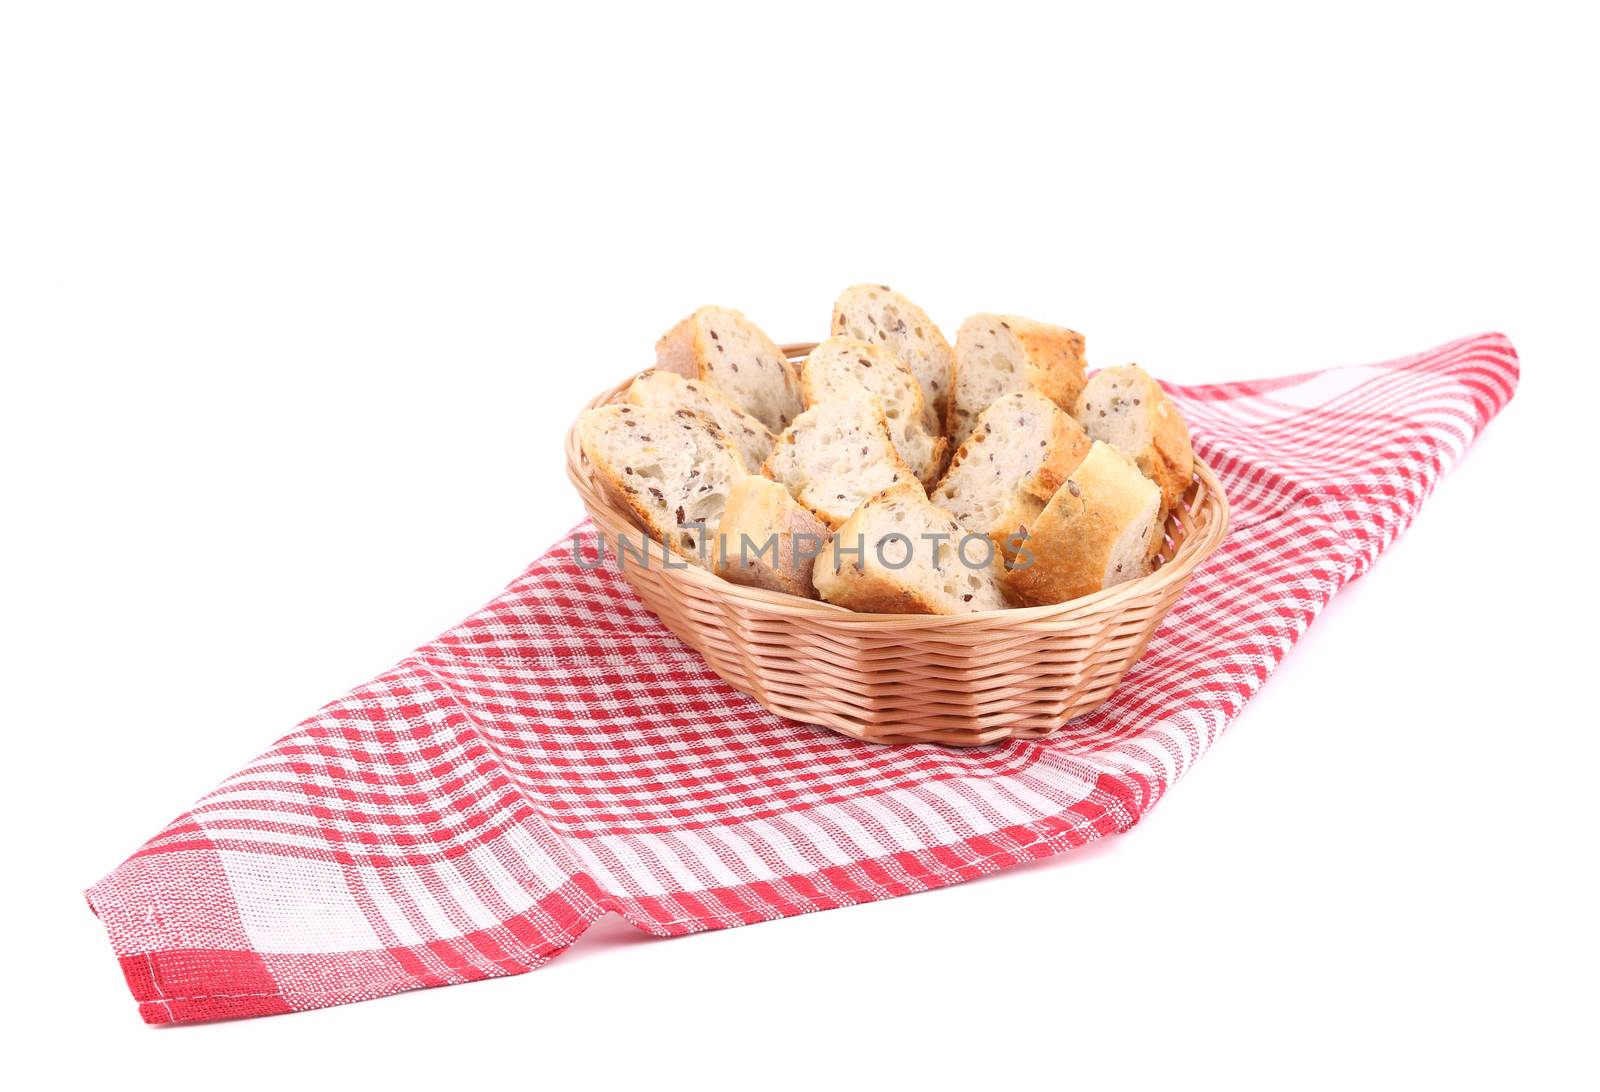 Wicker basket with bread slices on tablecloth. by indigolotos